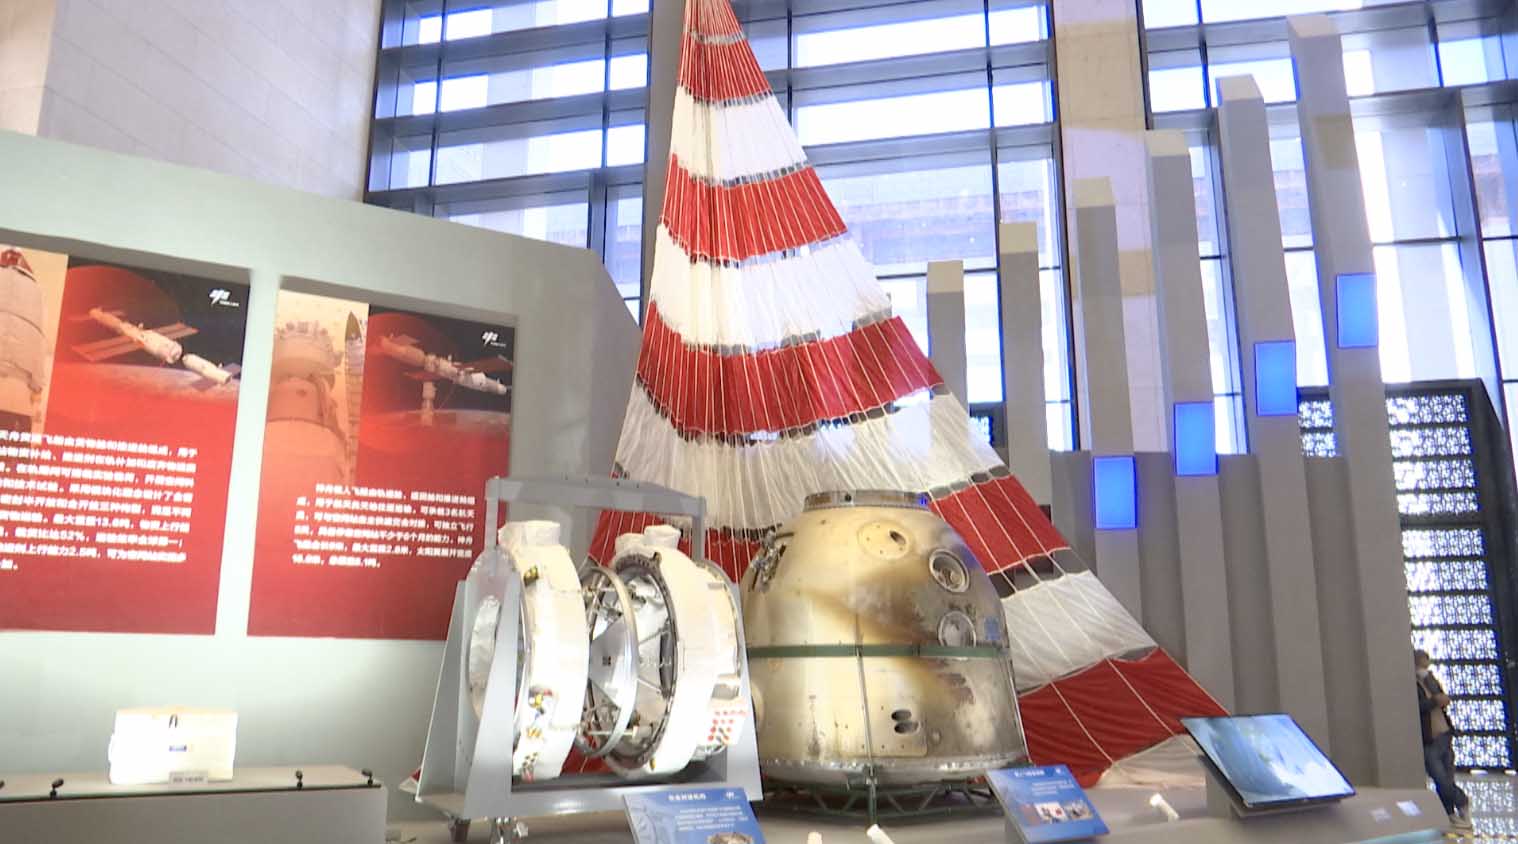 A model of the reentry capsule of China's Shenzhou-13 spacecraft is displayed at an exhibition in Beijing, China, February 24, 2023. /CGTN